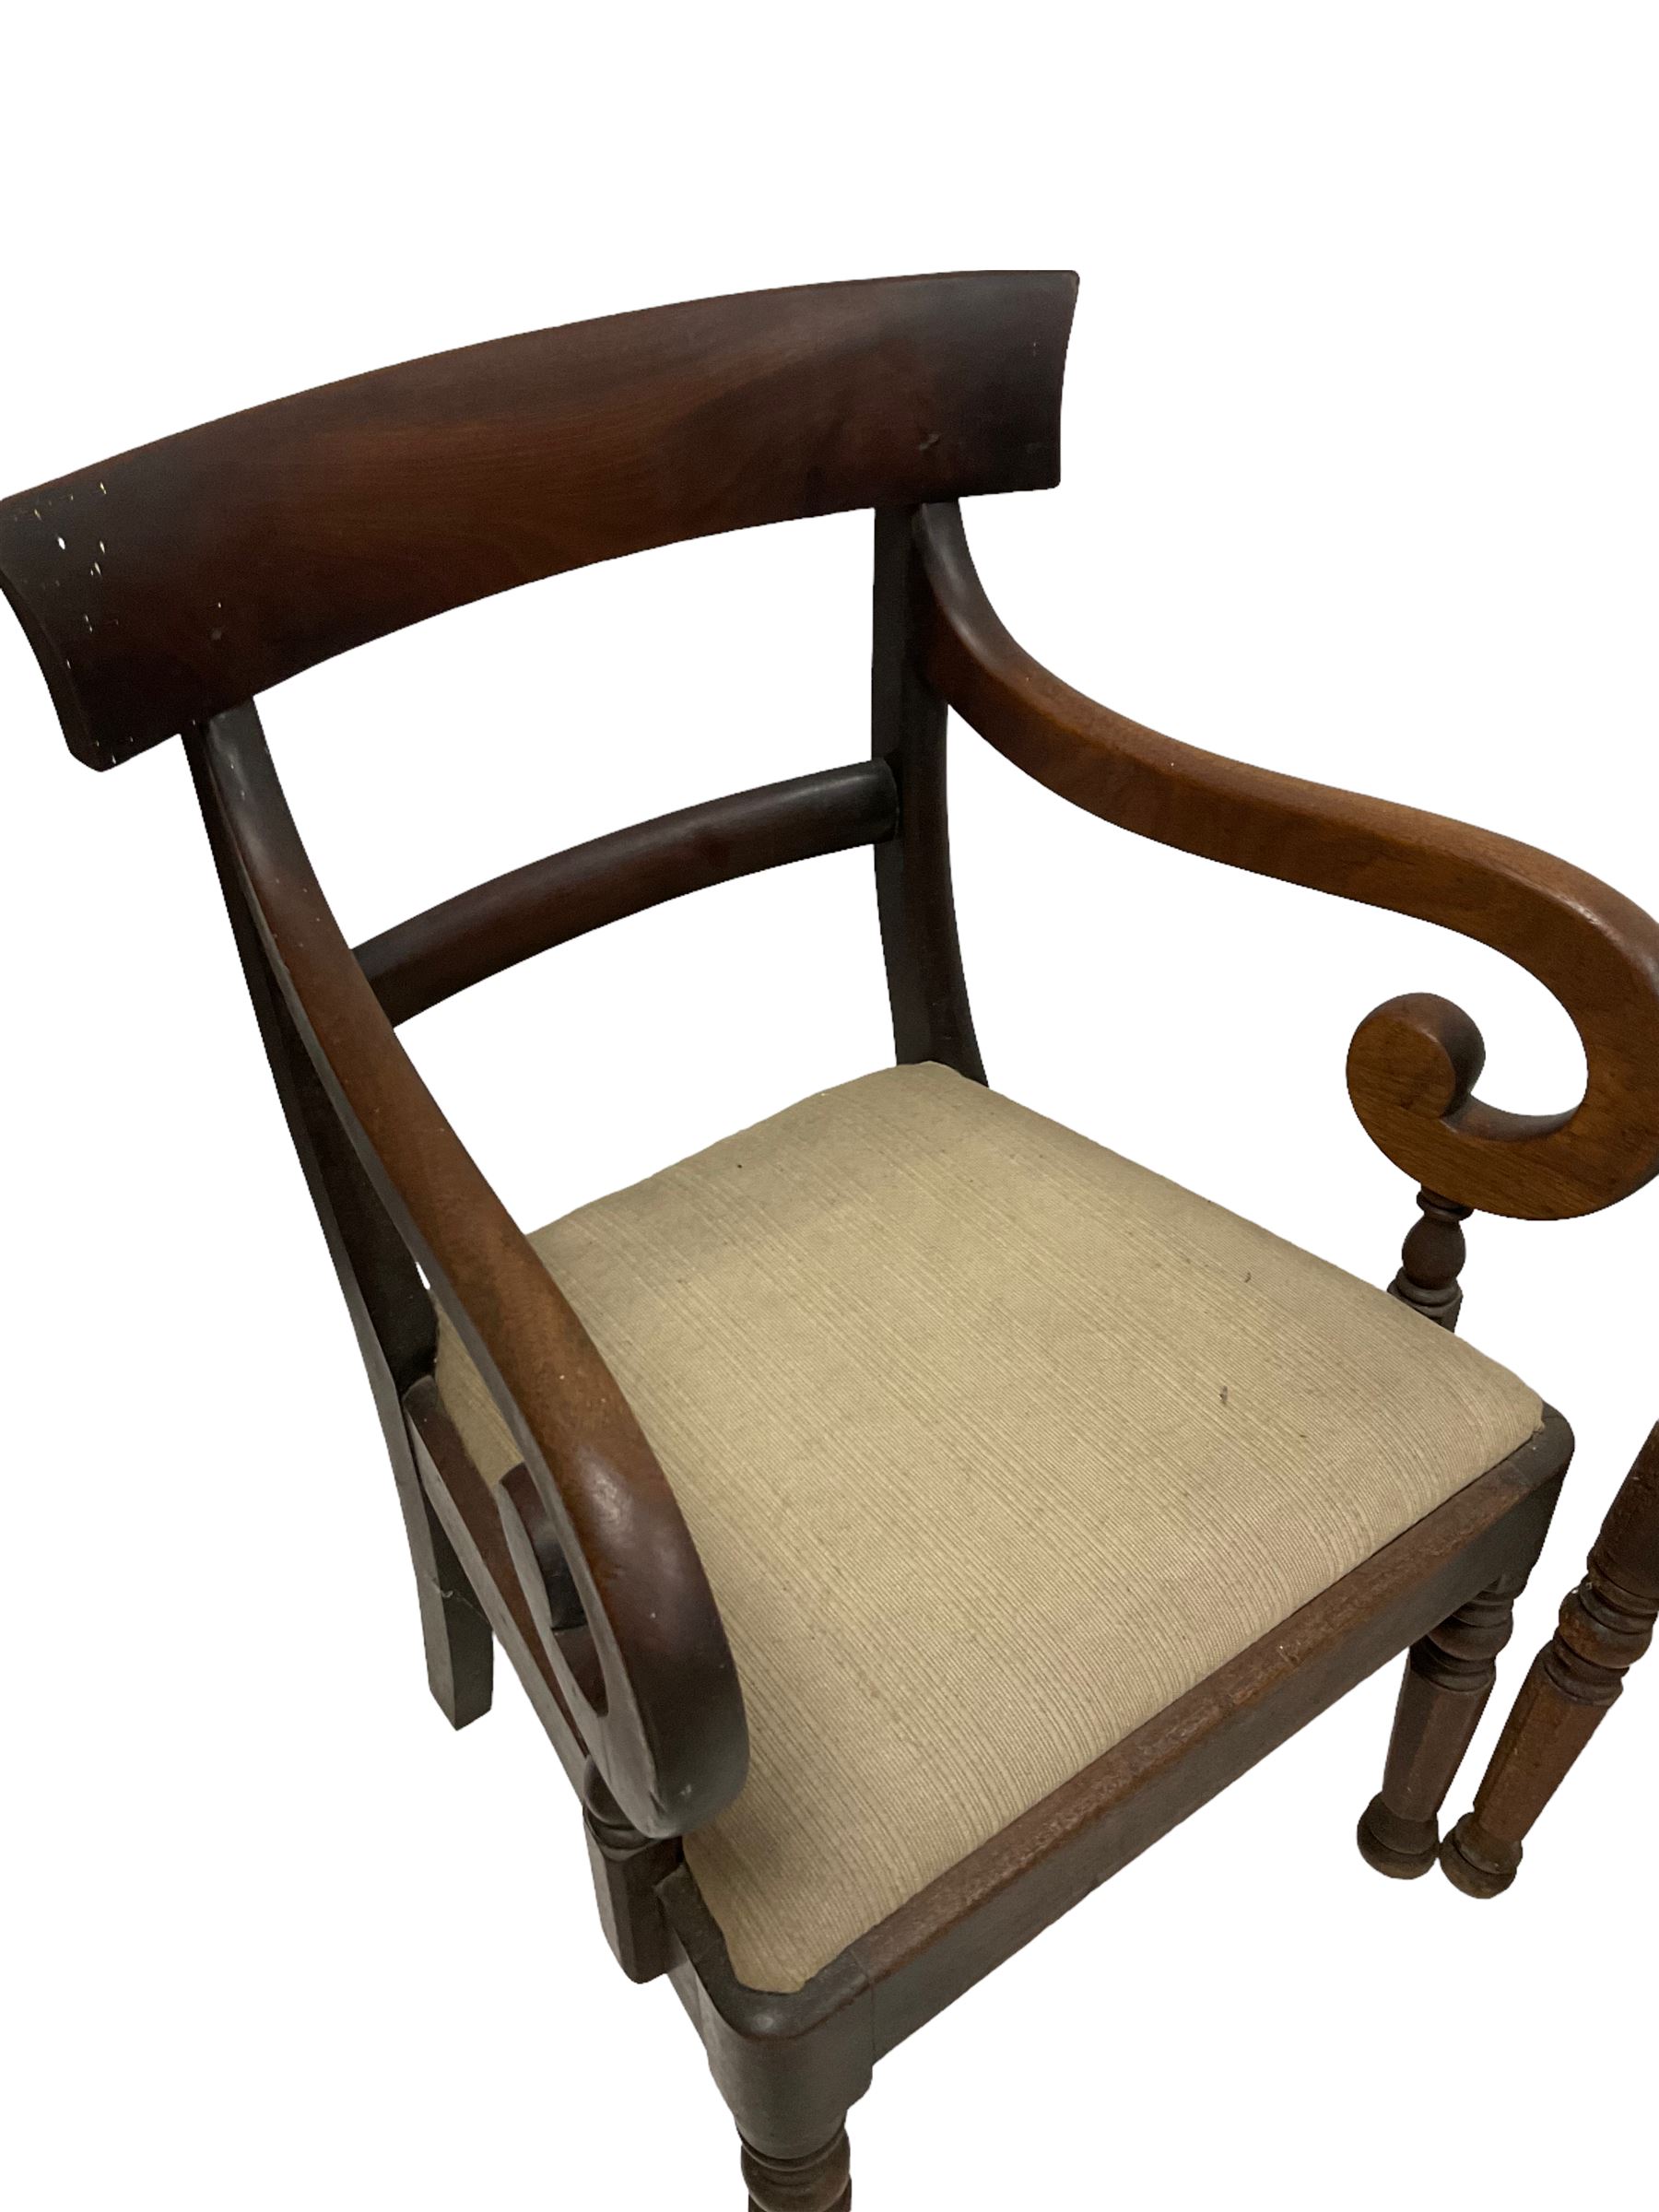 Pair of mahogany regency design elbow chairs - Image 2 of 3